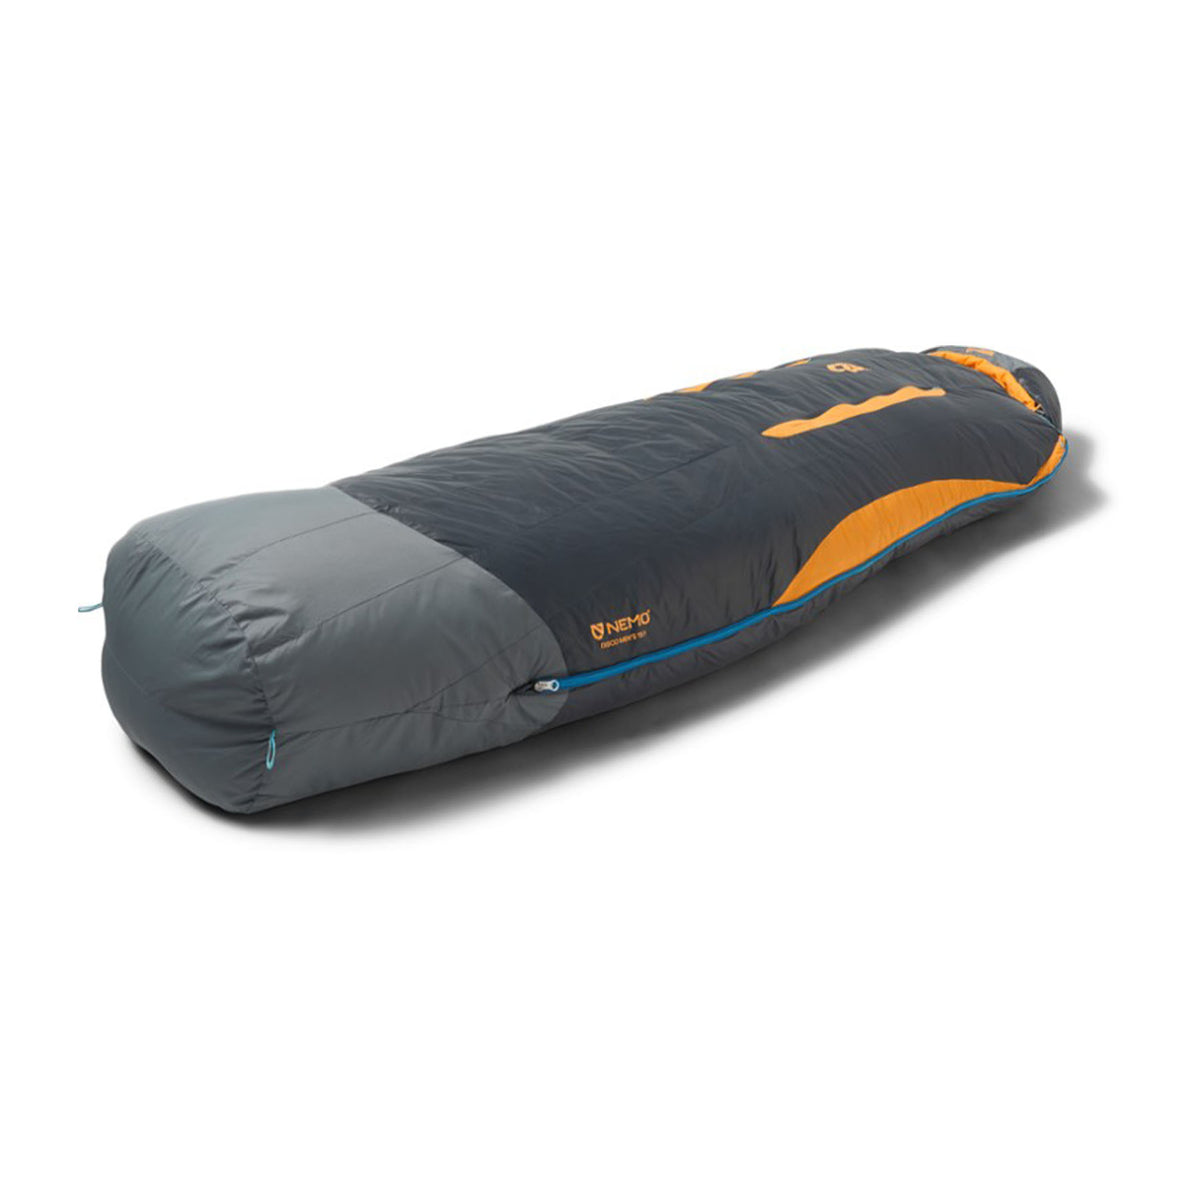 Hero image featuring a side angle view of the Nemo Men's Disco 15 sleeping bag in torch stormy night. 